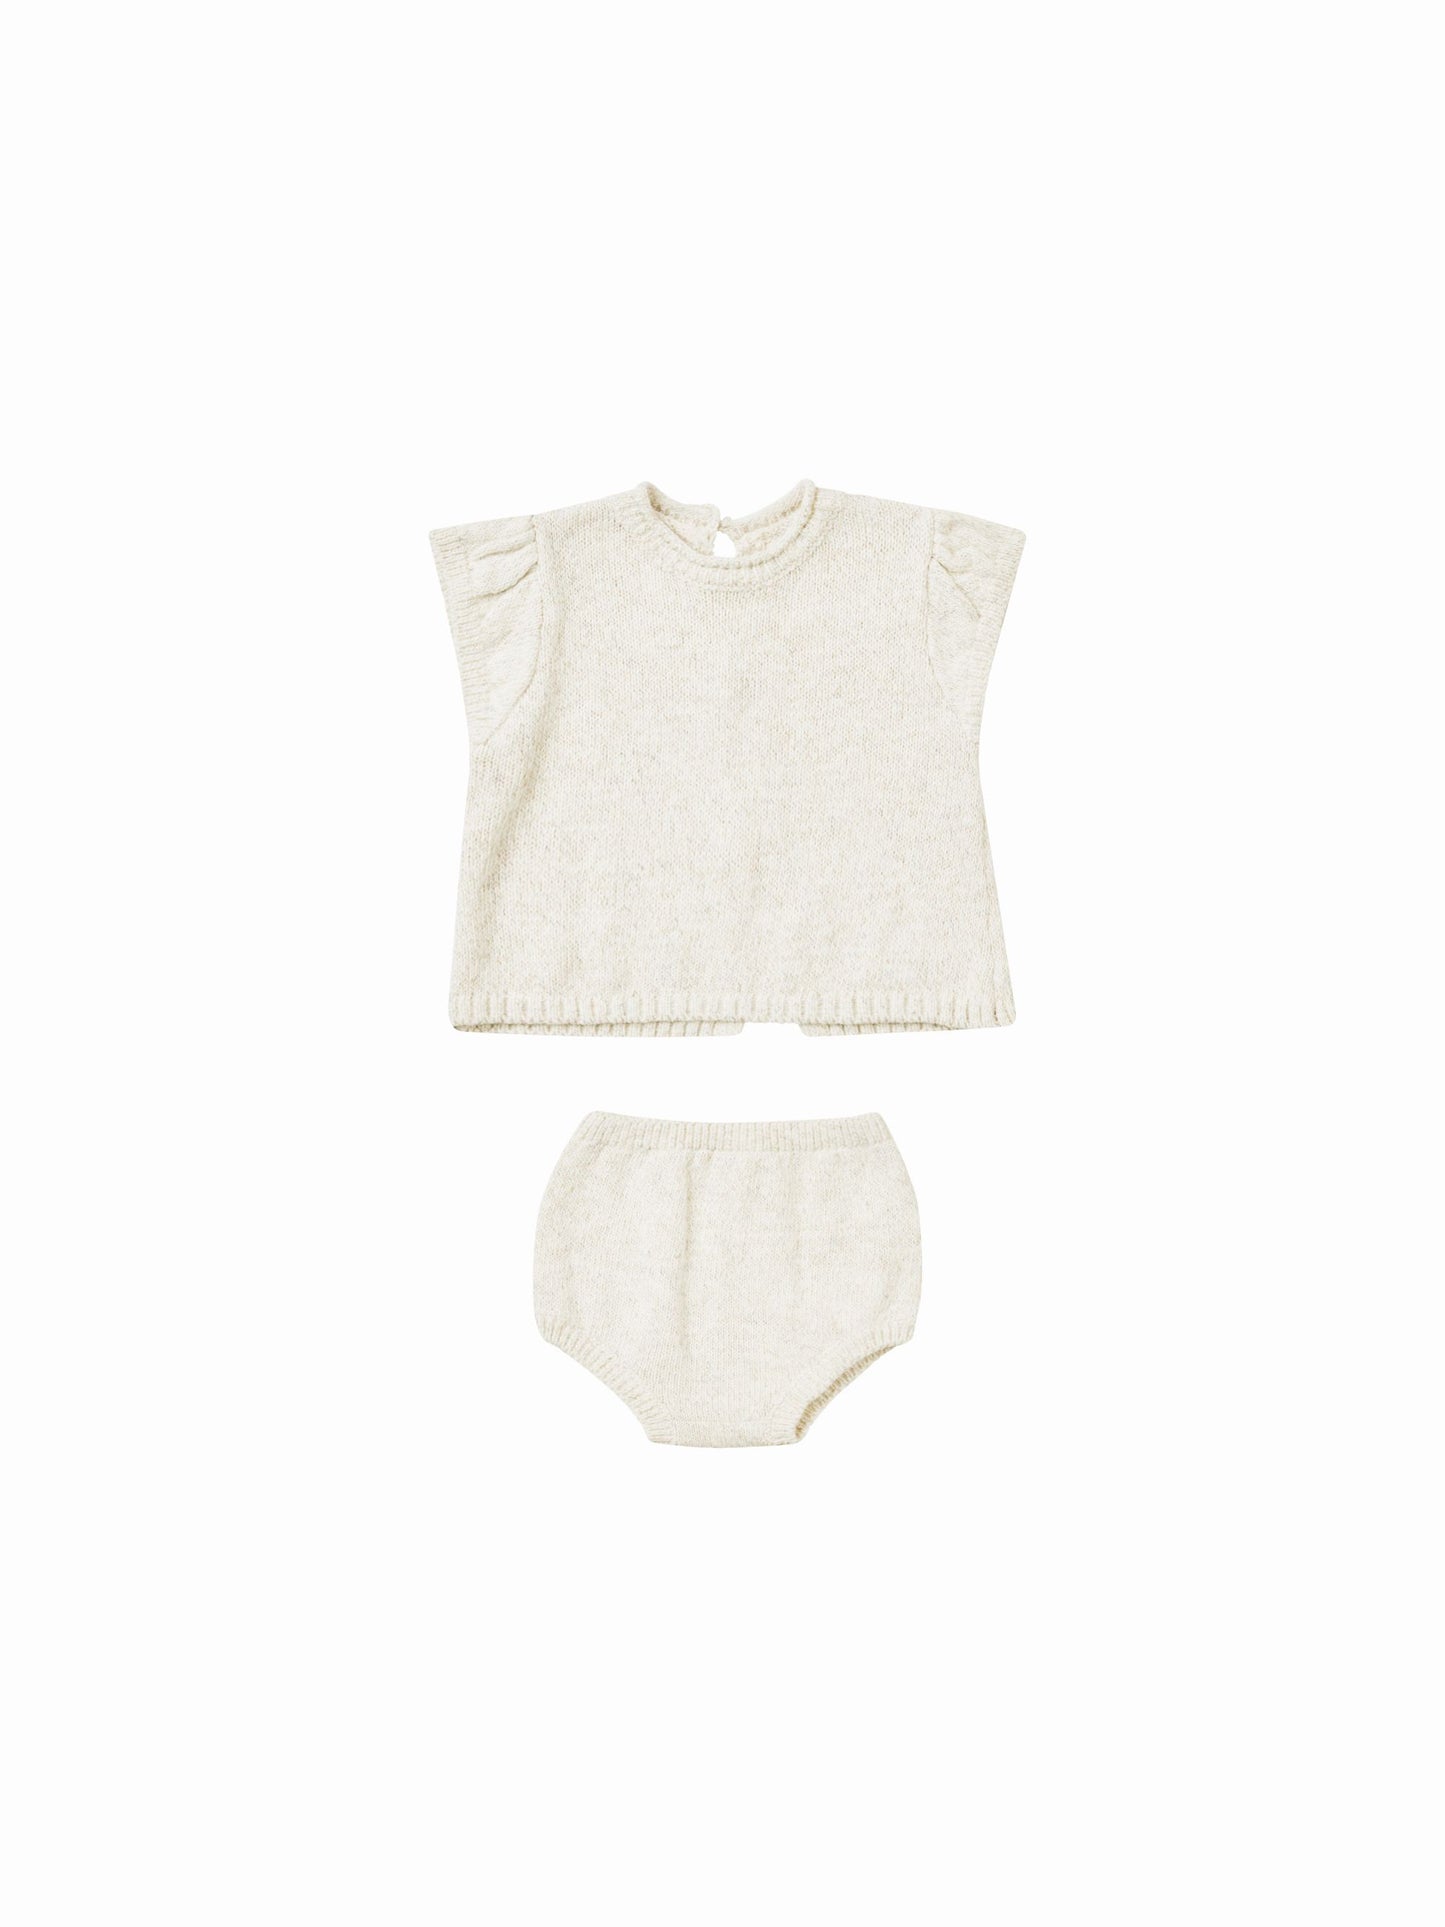 Quincy Mae Penny Knit Set in Ivory